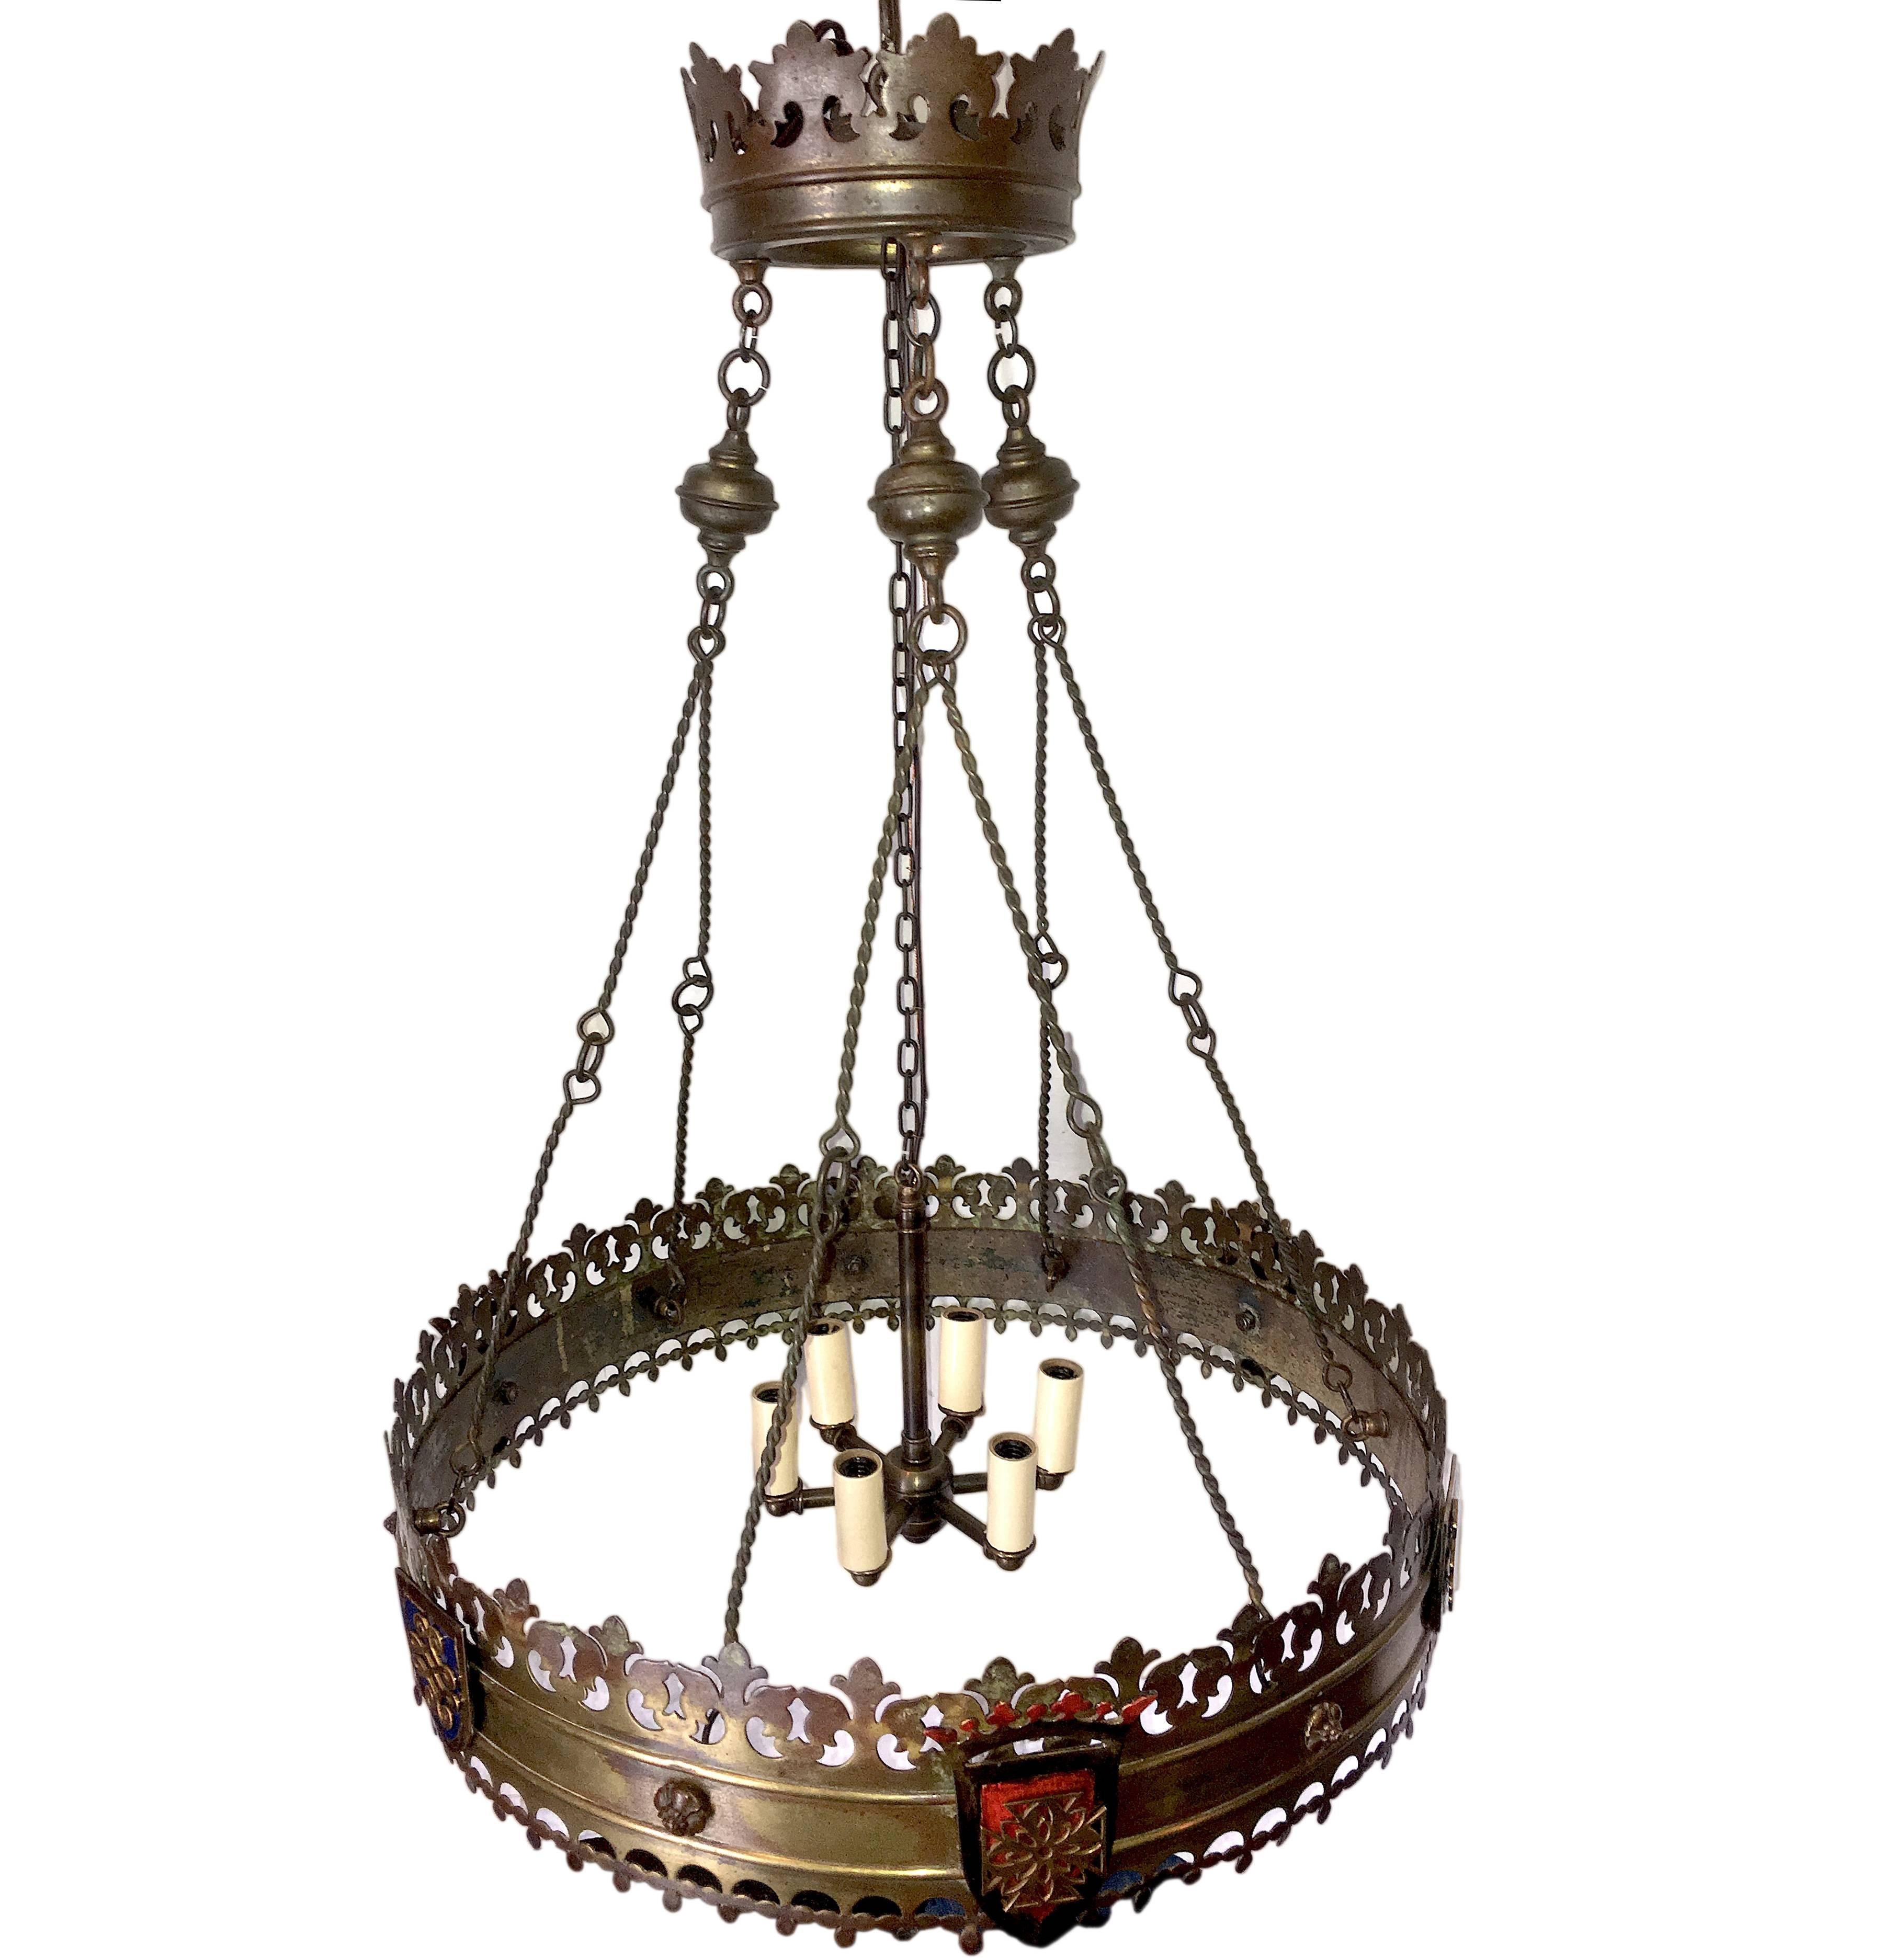 An English circa 1910 cast bronze six-light chandelier with shields and crowns decoration, original patina and paint details.

Measurements:
Diameter: 20